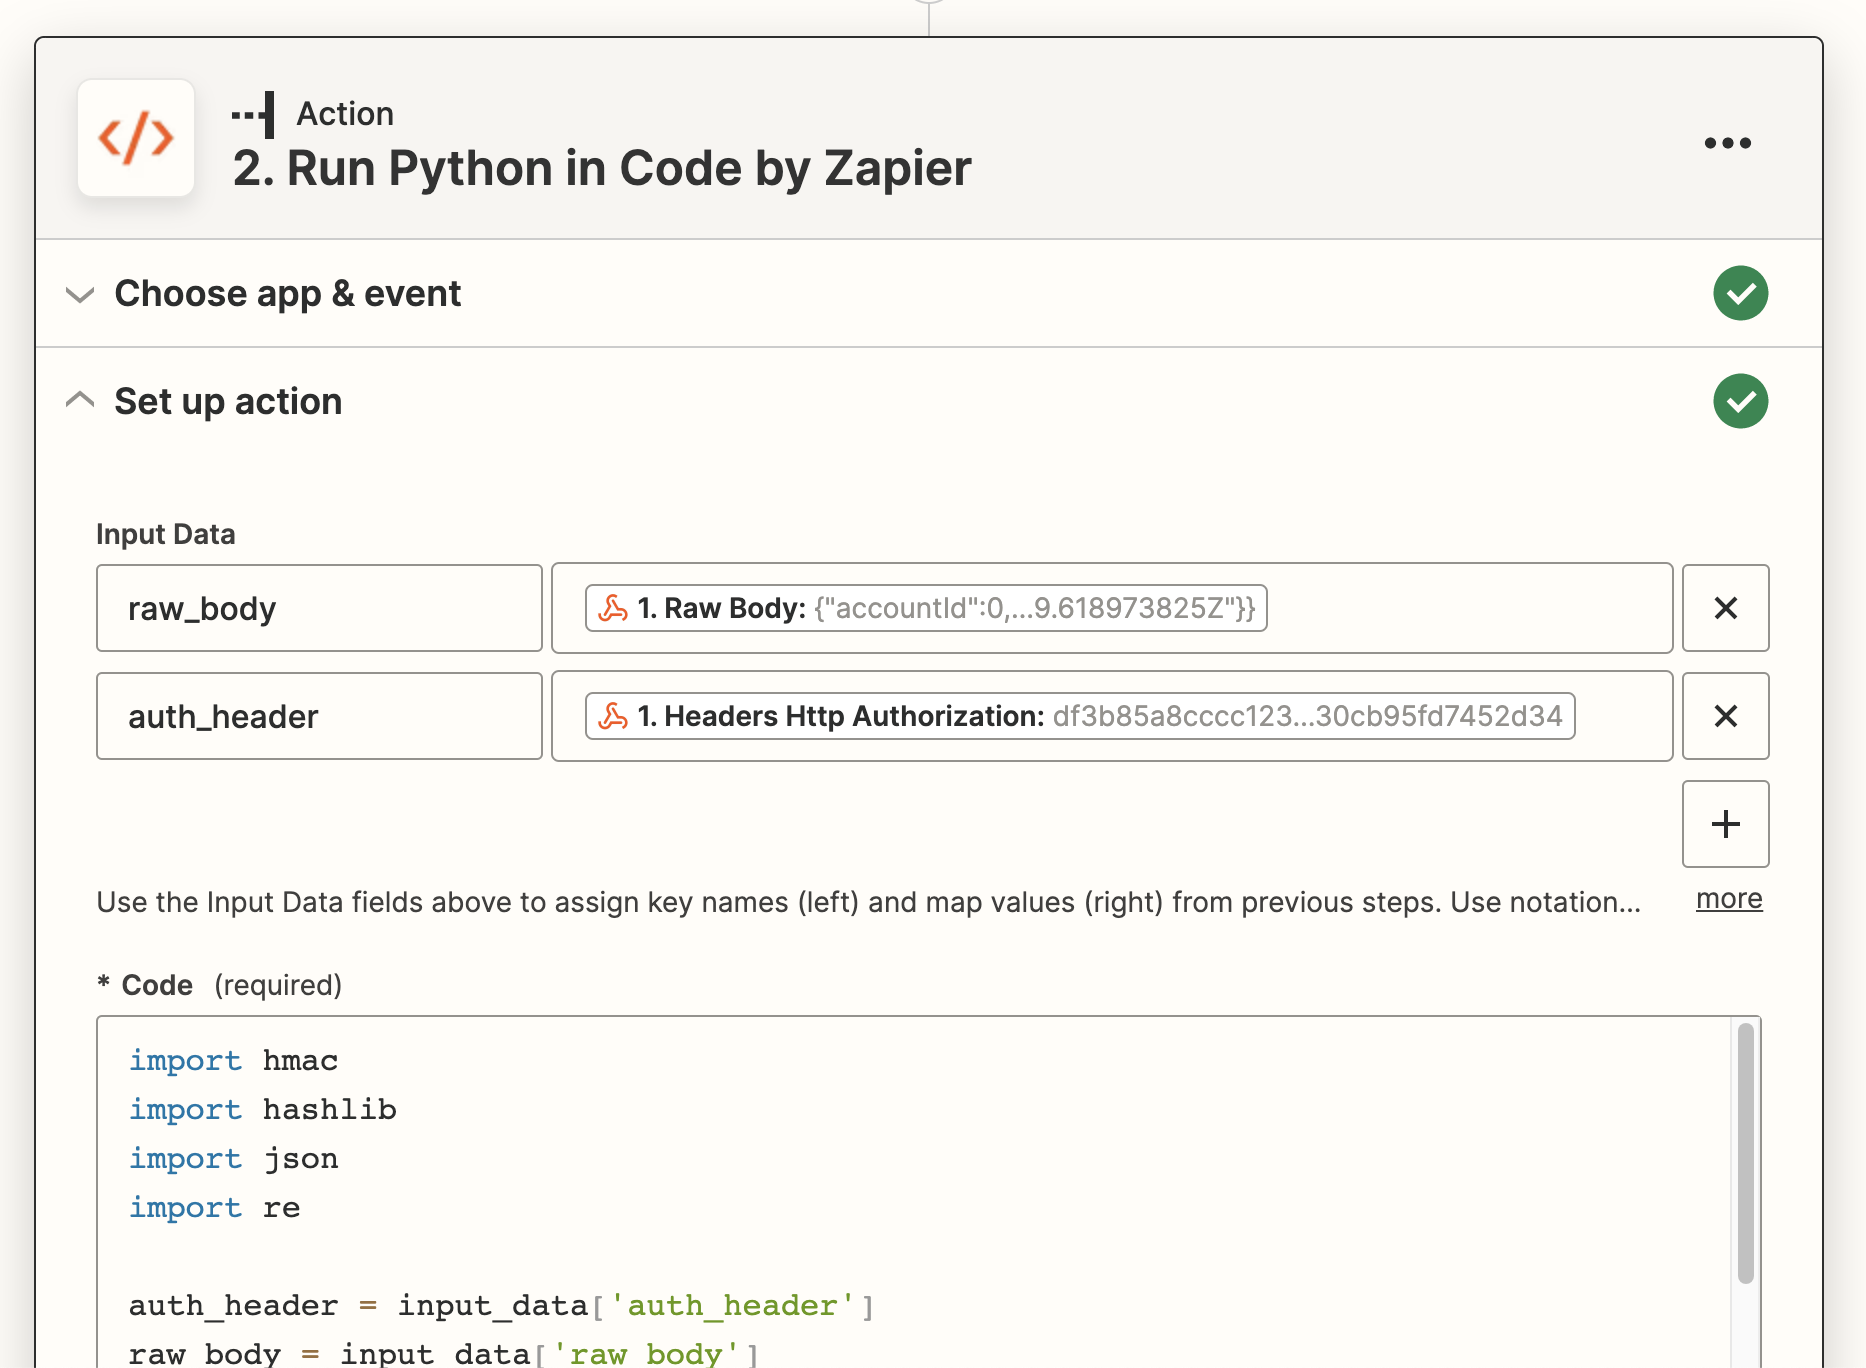 Screenshot of the Zapier UI, showing the mappings of raw_body and auth_header